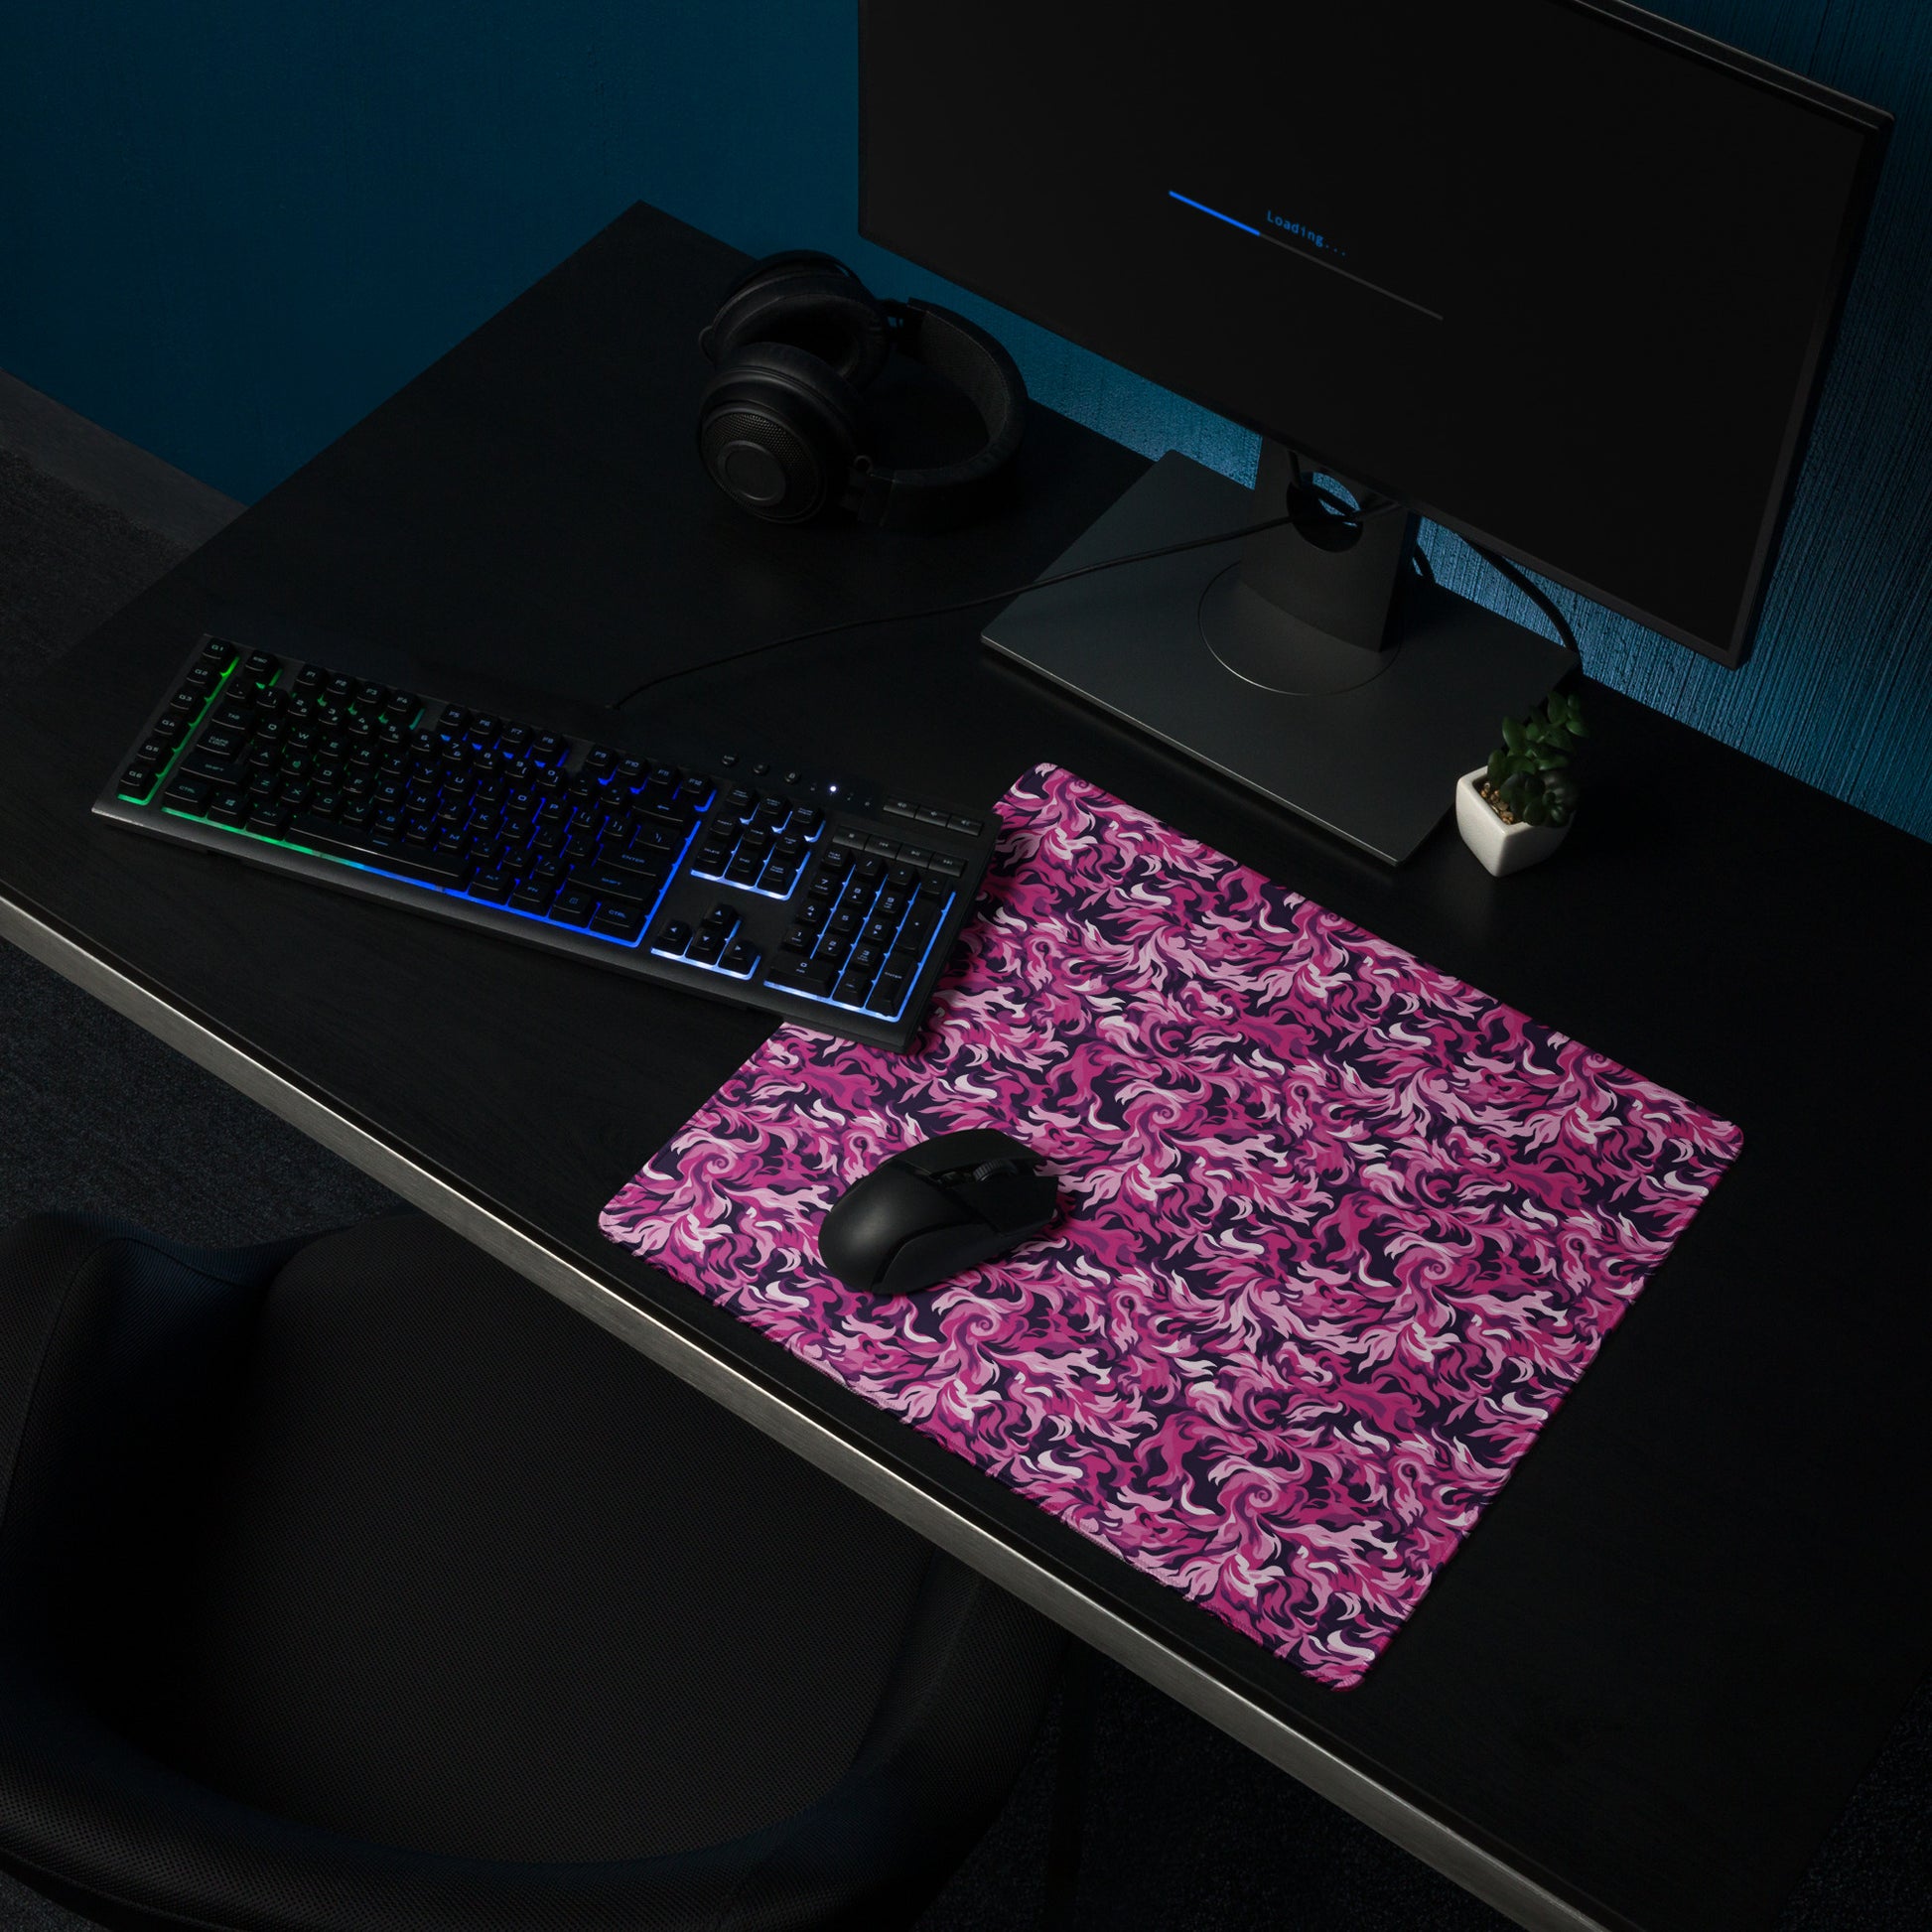 A 18" x 16" desk pad with a pink and magenta camo pattern sitting on a desk.